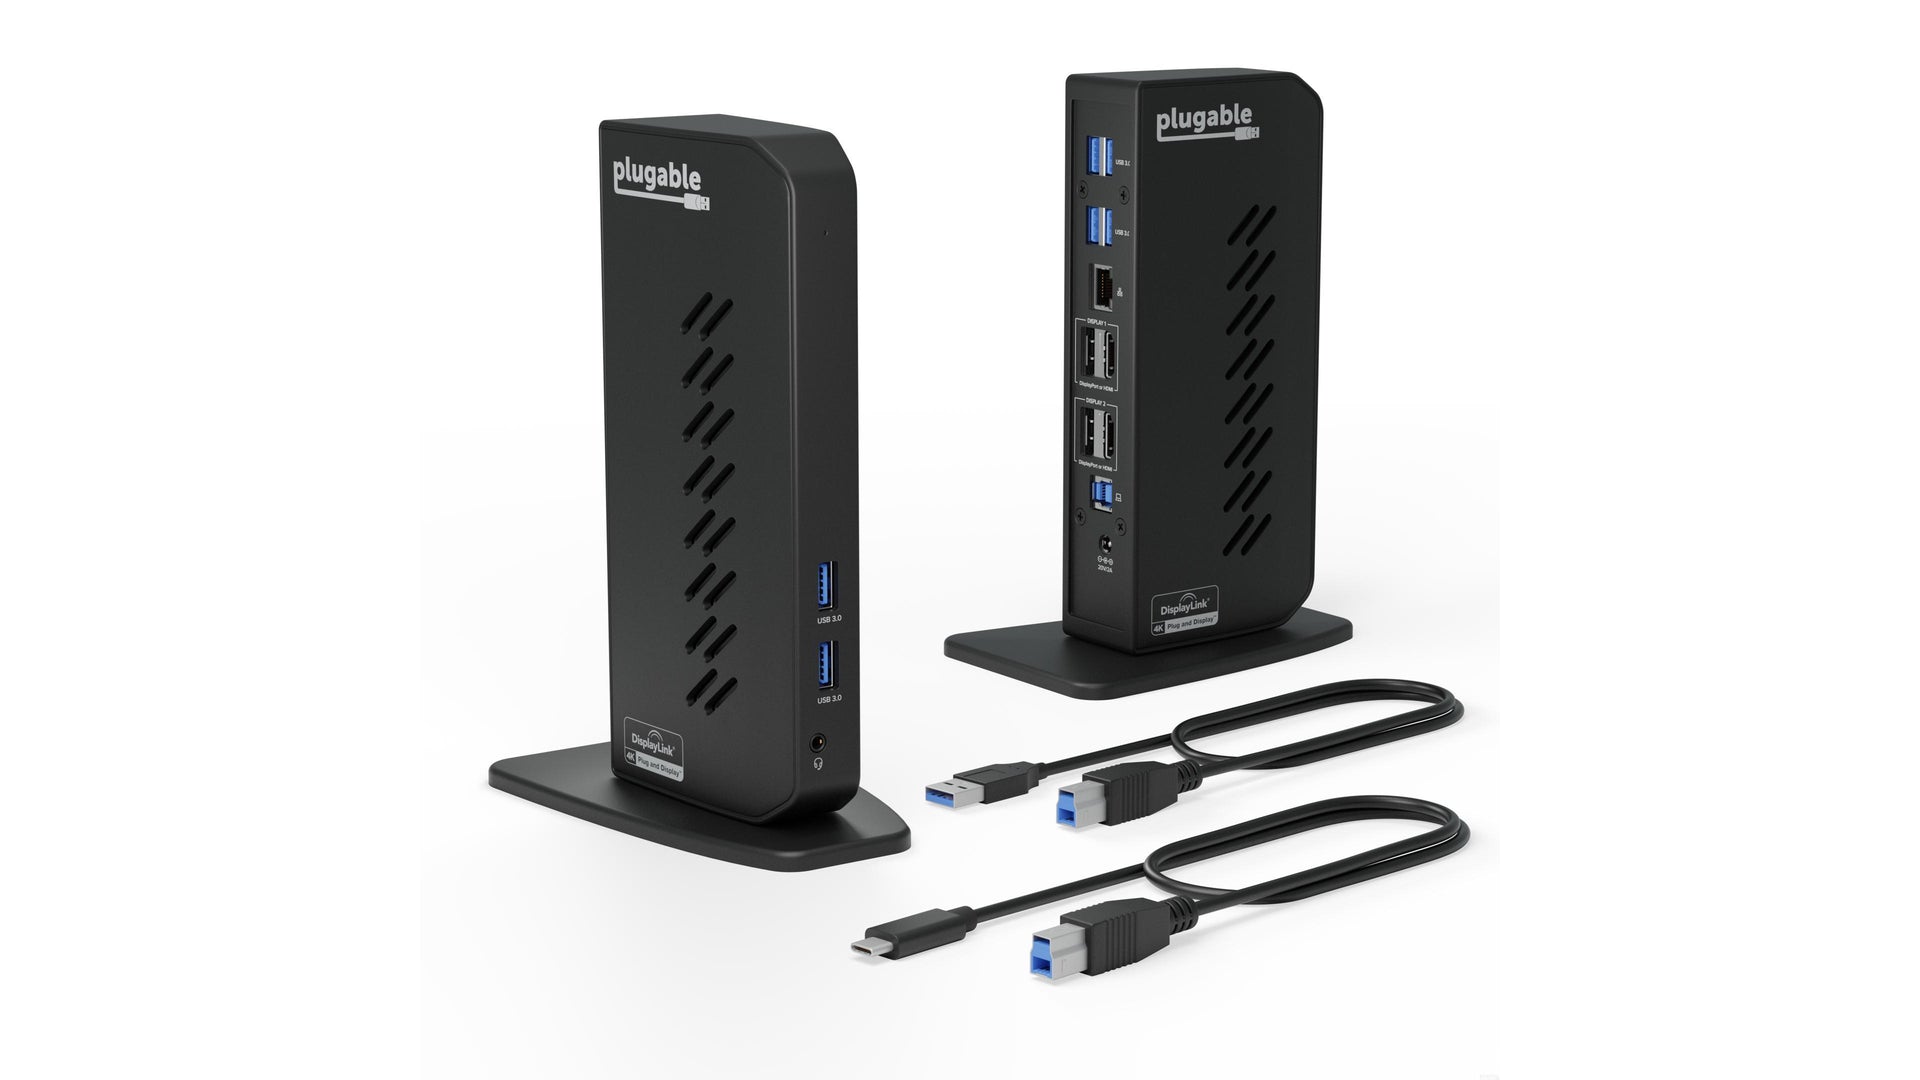 WAVLINK USB 3.0 to Dual HDMI UHD Universal Video Adapter, Supports 6  Monitor Displays, 4K and 1080p External Video Display,For M1/M2 Mac,  Windows